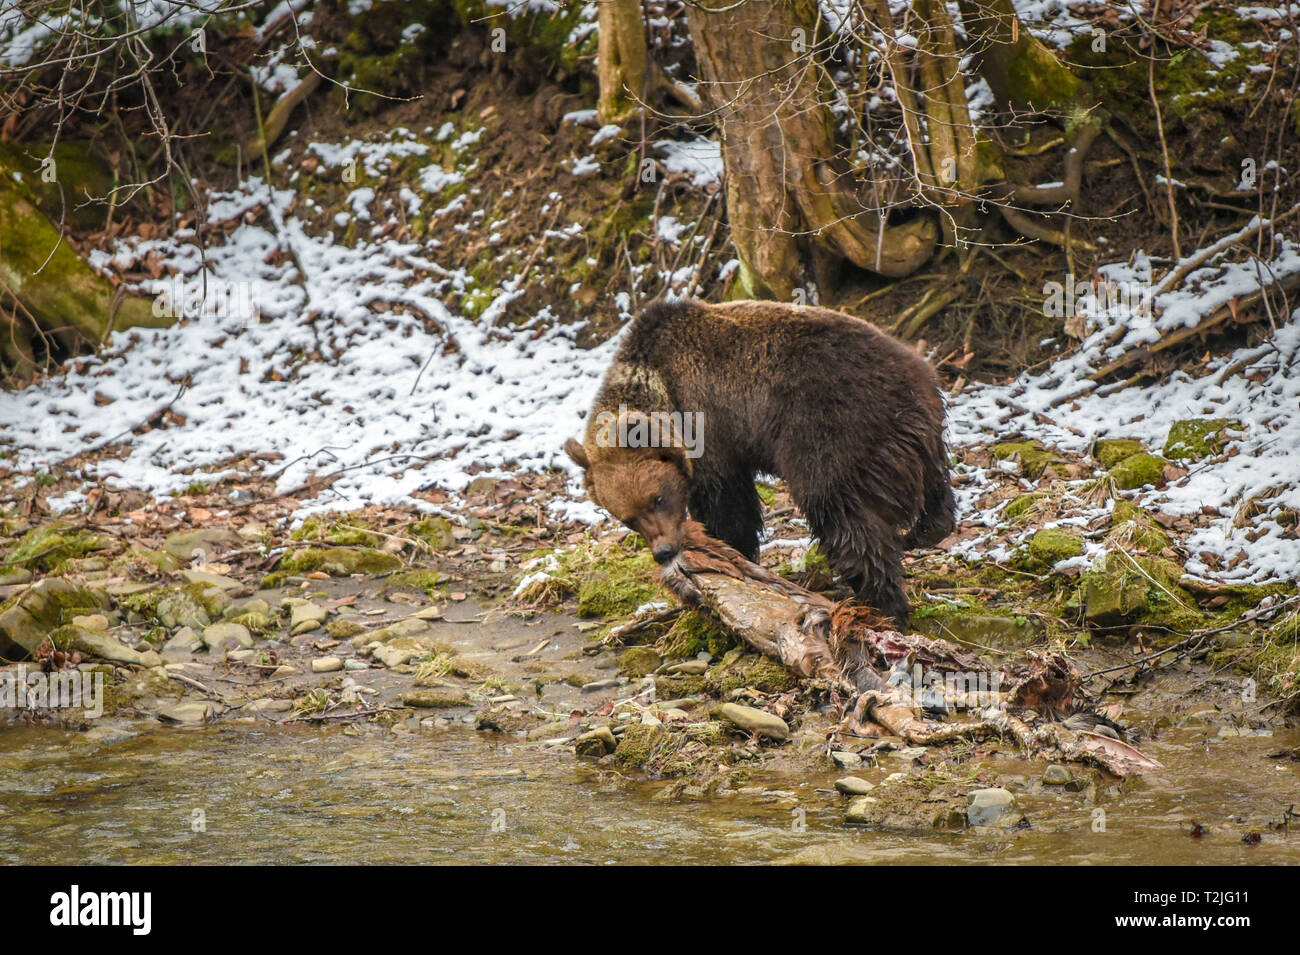 Brown bear feeding on deer carcass on the river bank in early spring, Bieszczady Mountains in Carpathian Region, Poland, Eastern Europe. Stock Photo